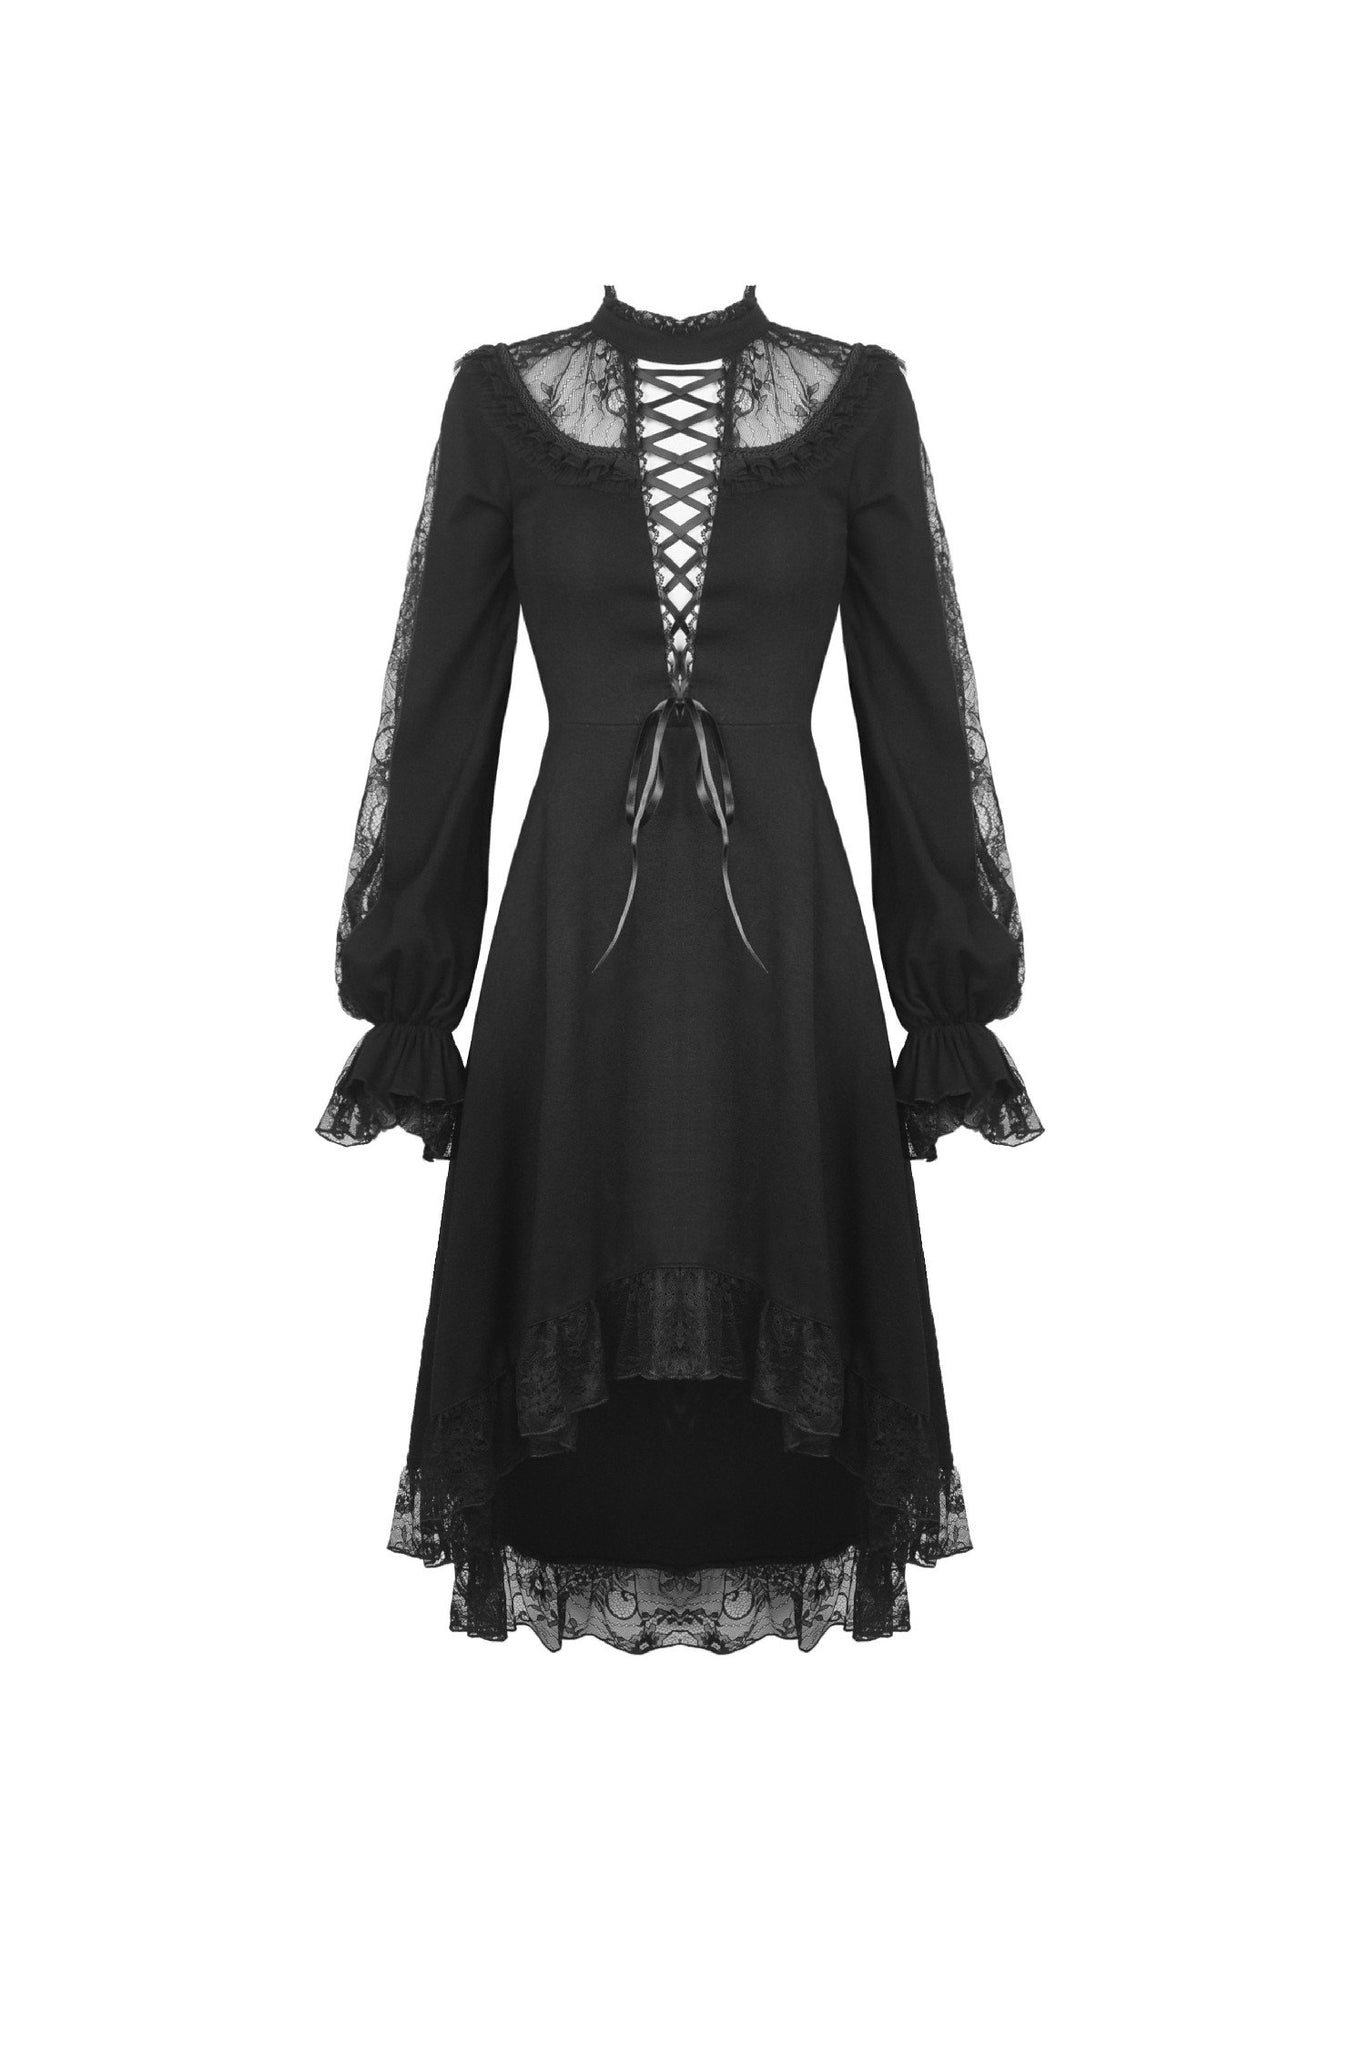 Lace lace up longsleeves cocktail gothic dress DW436 – DARK IN LOVE